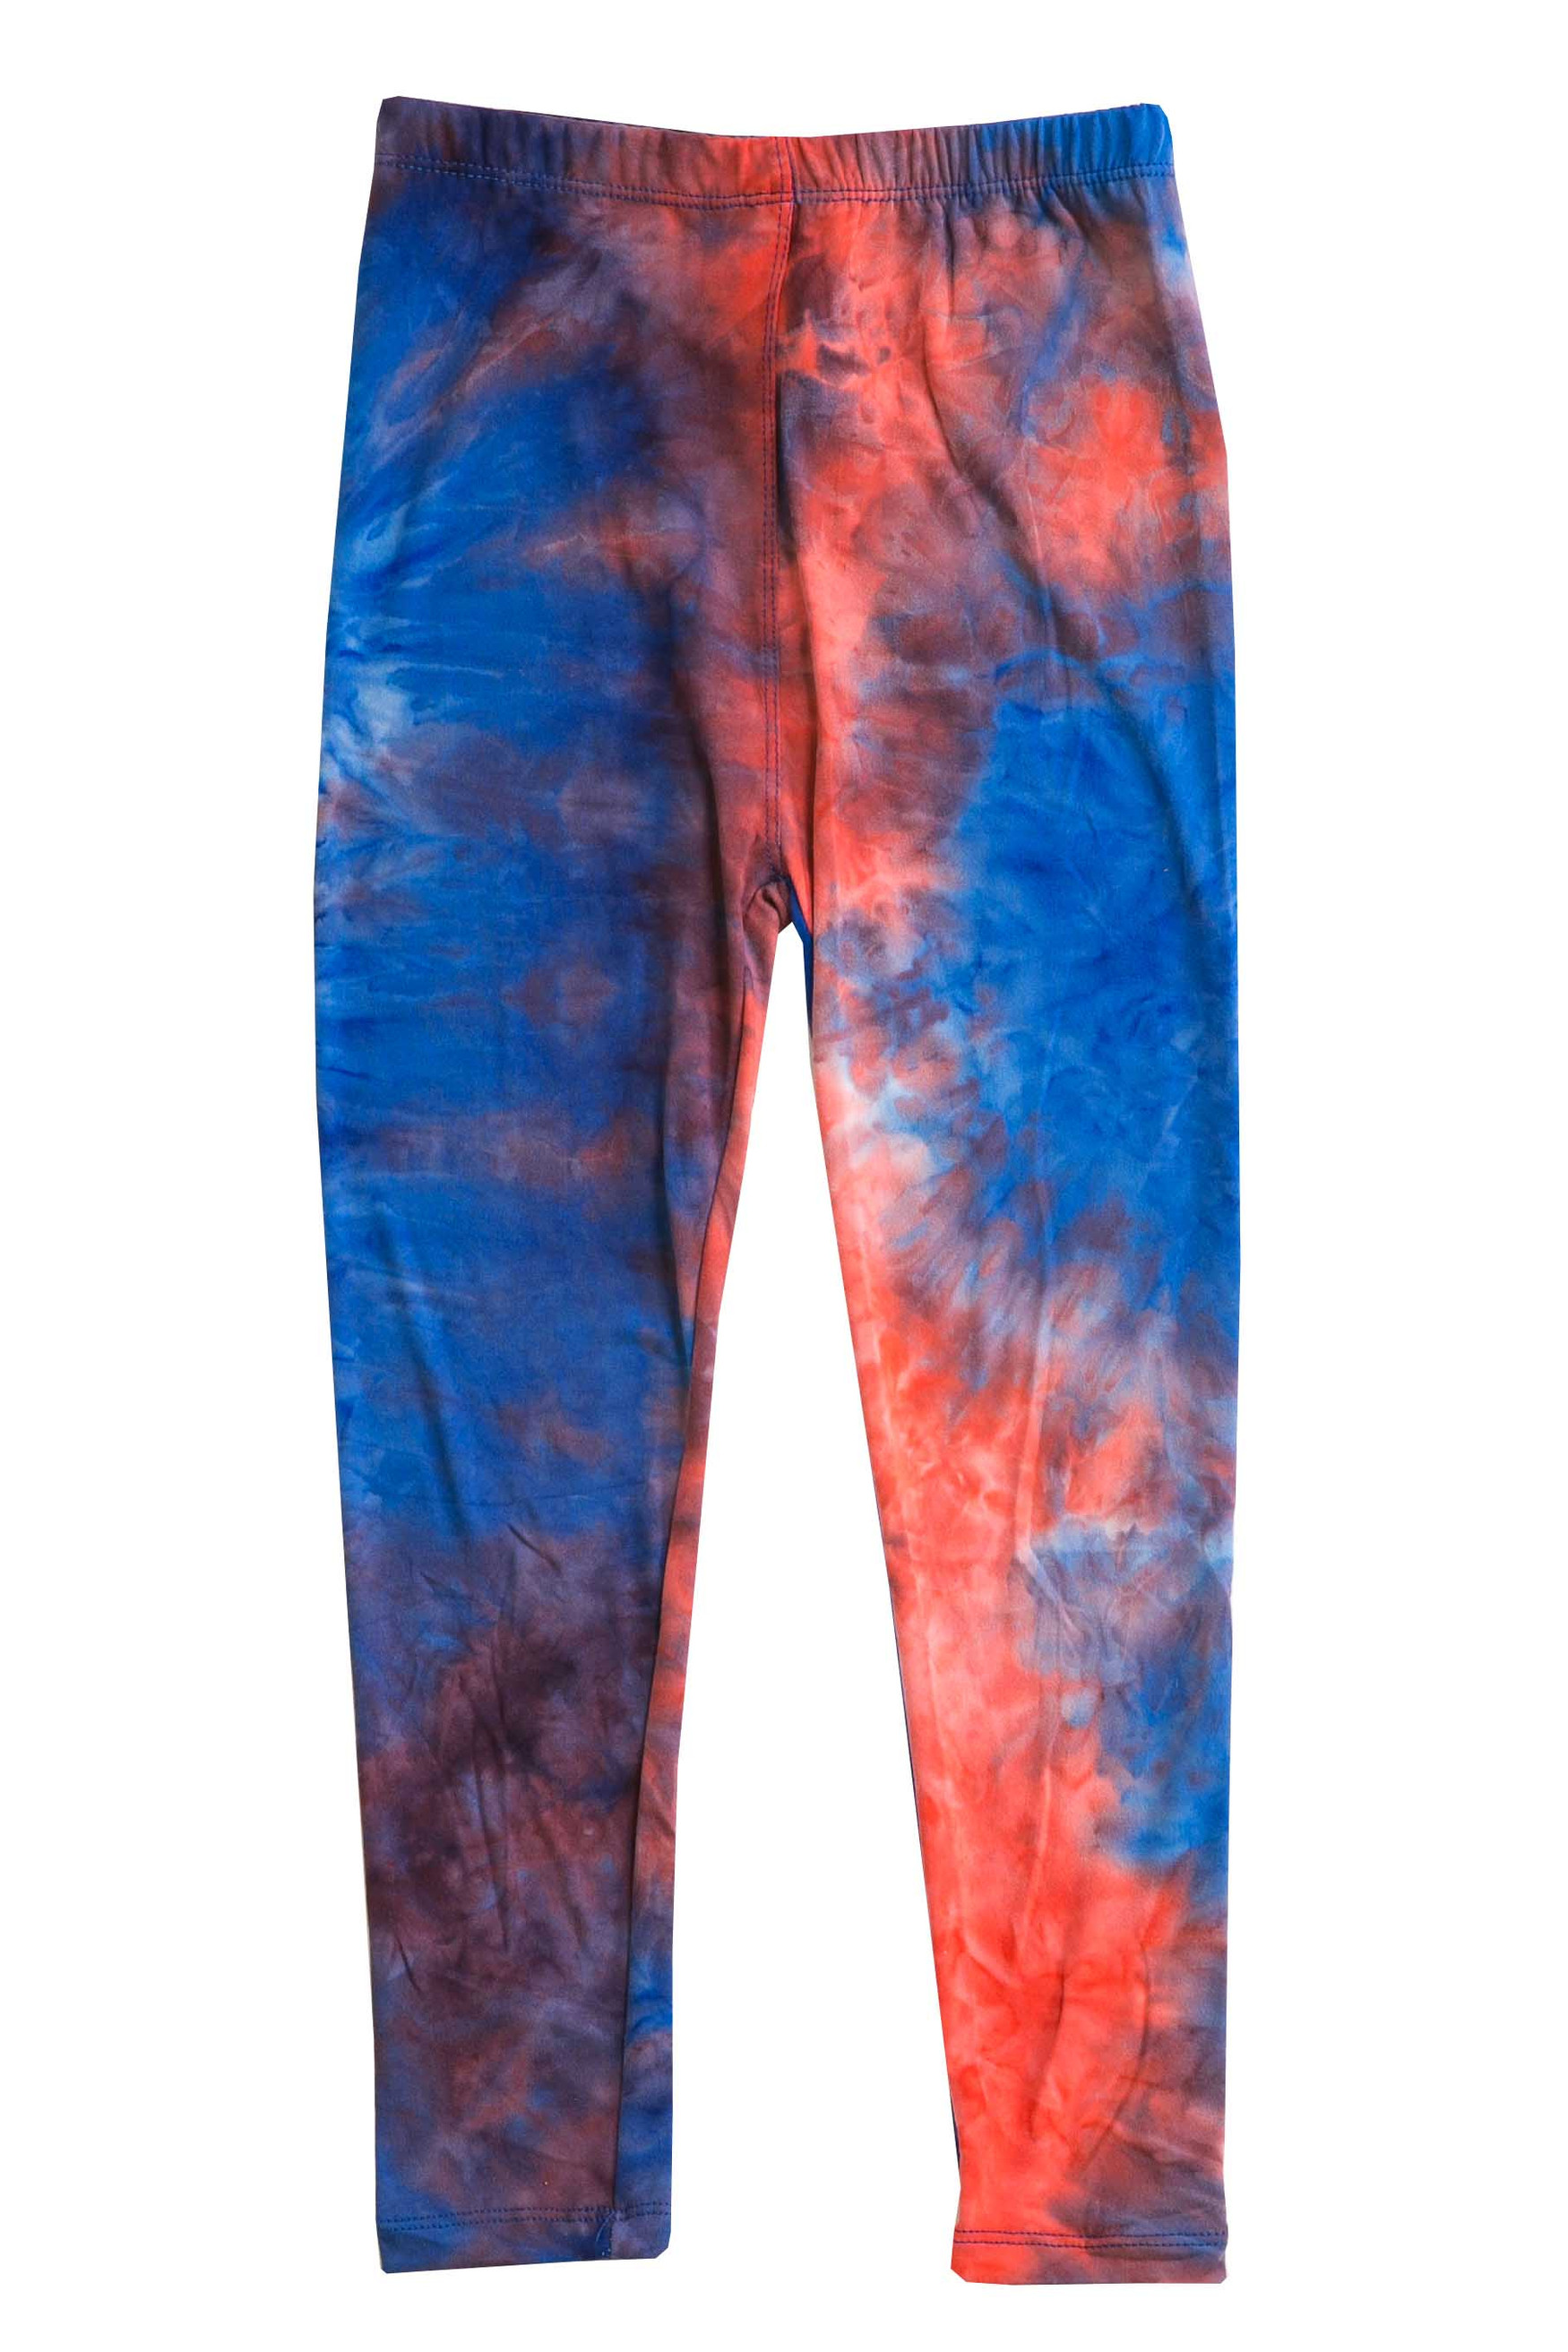 Buttery Soft Red and Blue Kids Leggings